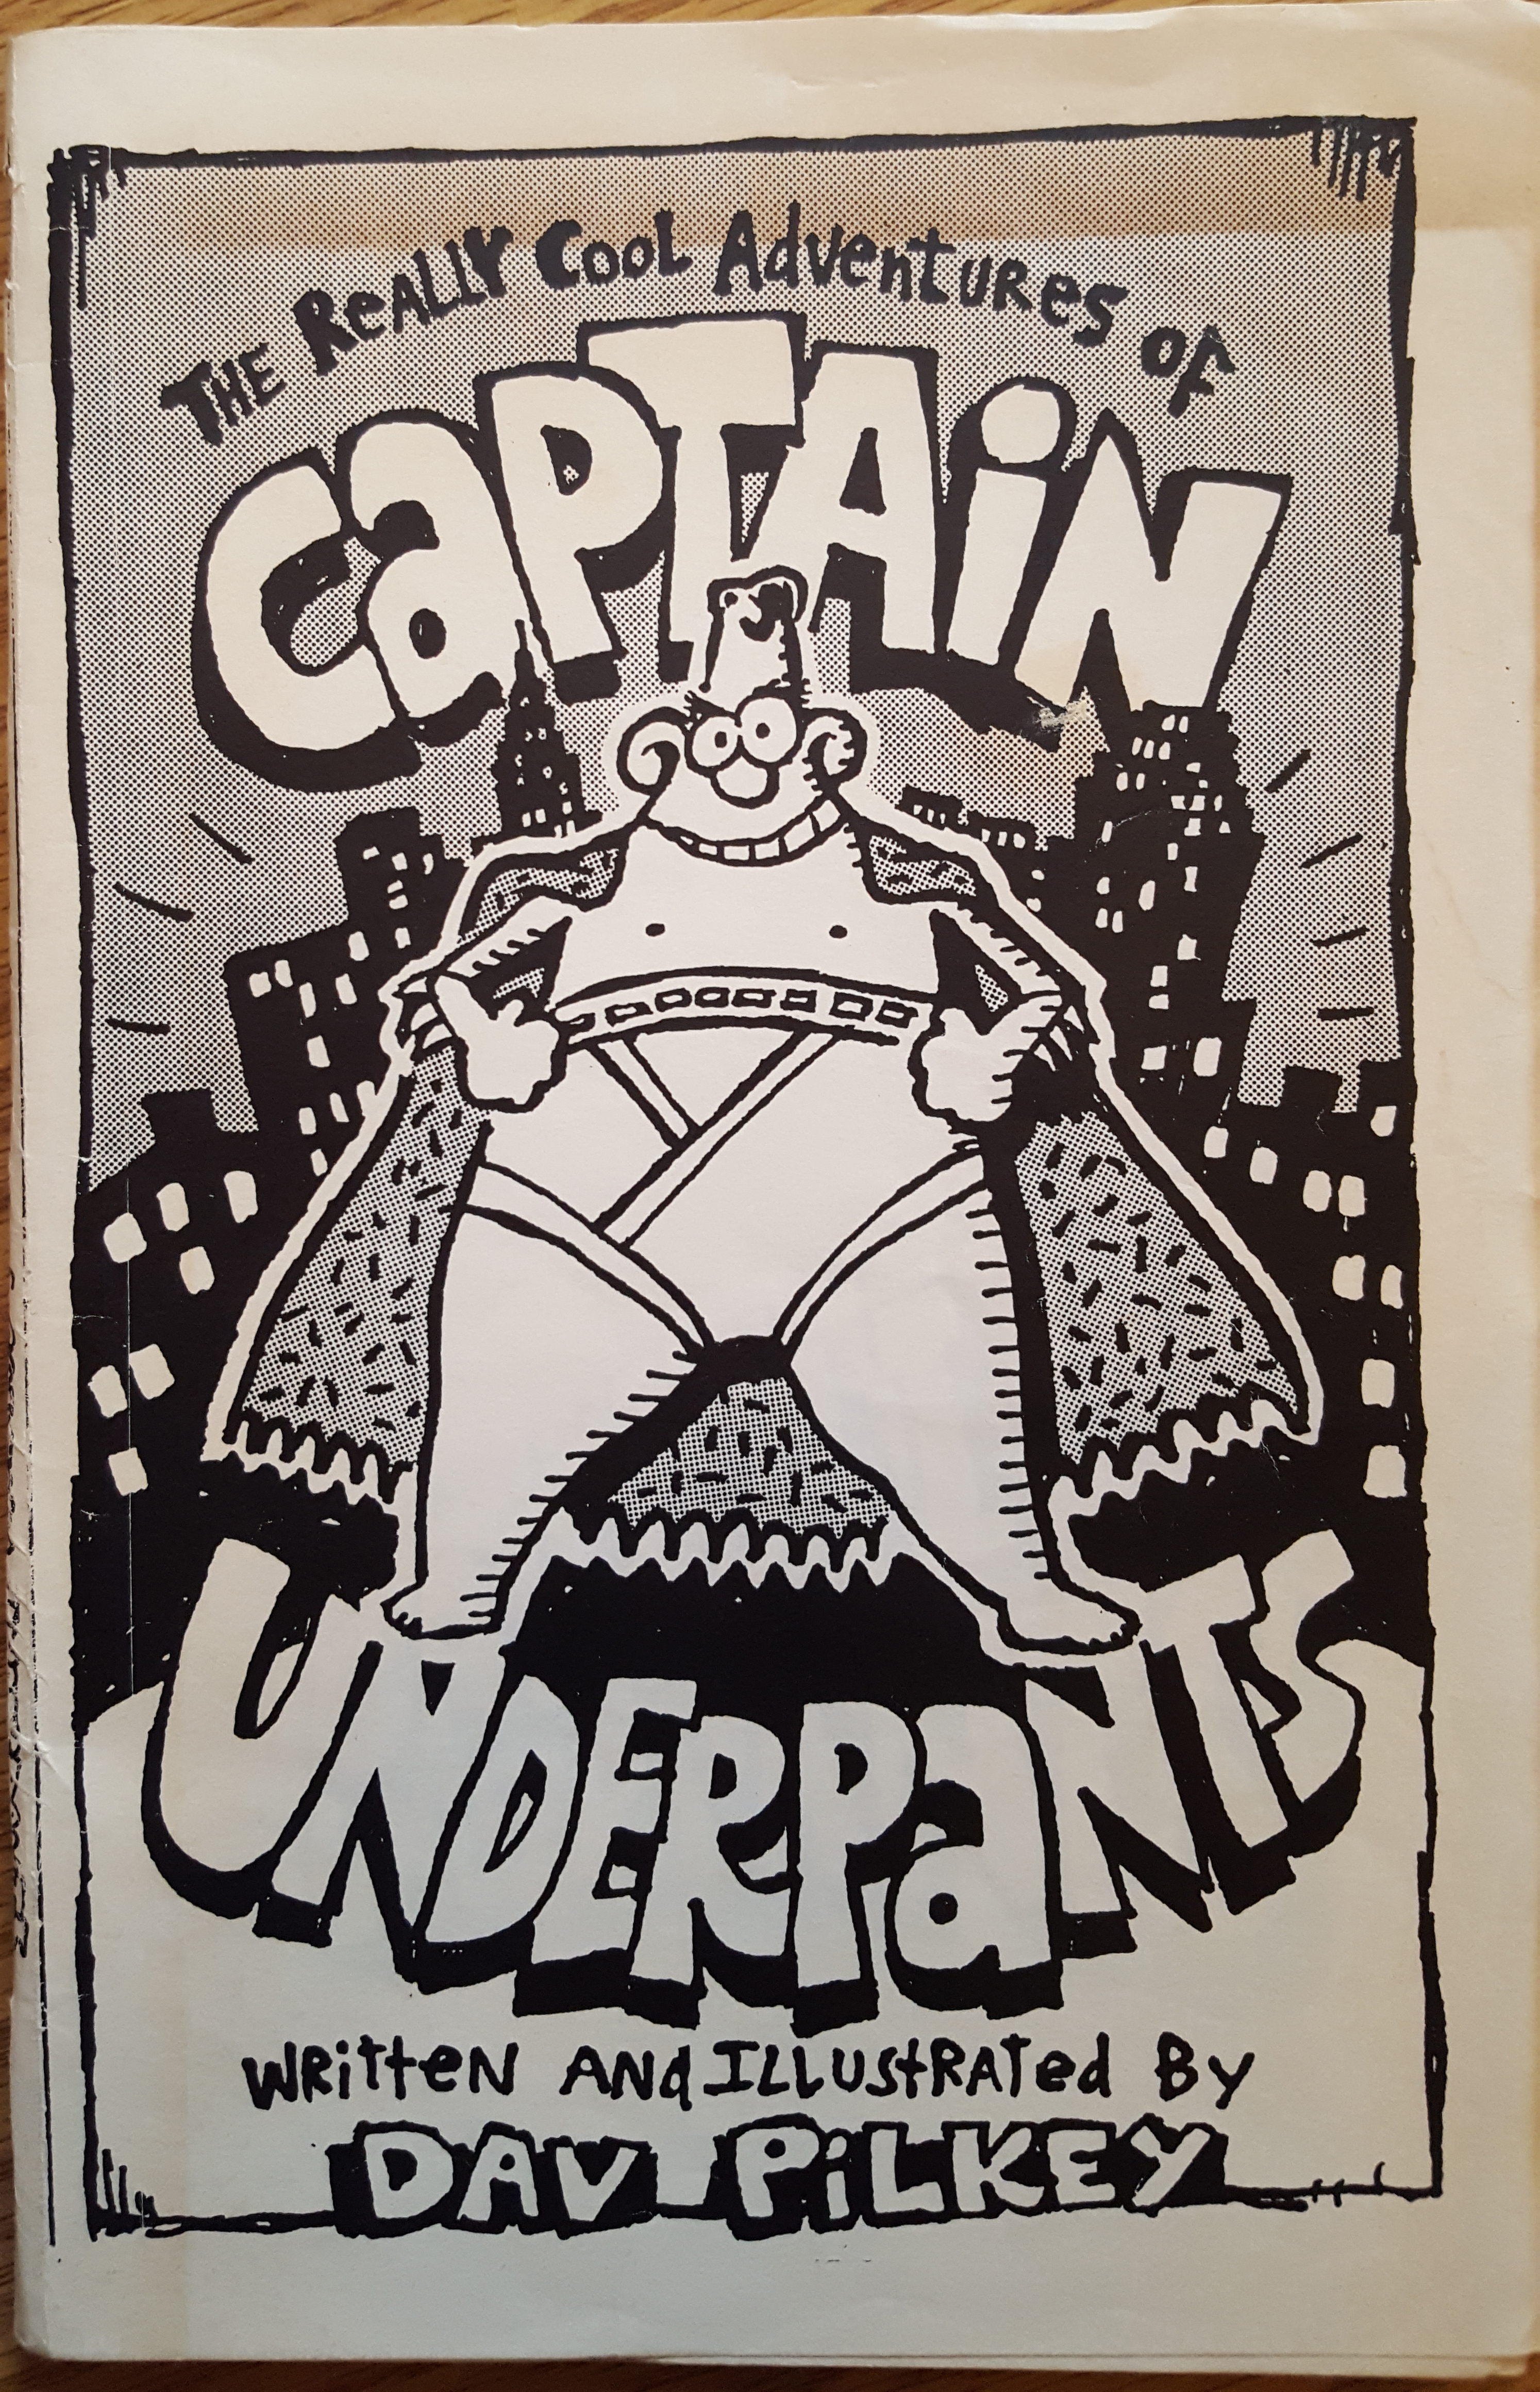 The Really Cool Adventures Of Captain Underpants, Captain Underpants Wiki